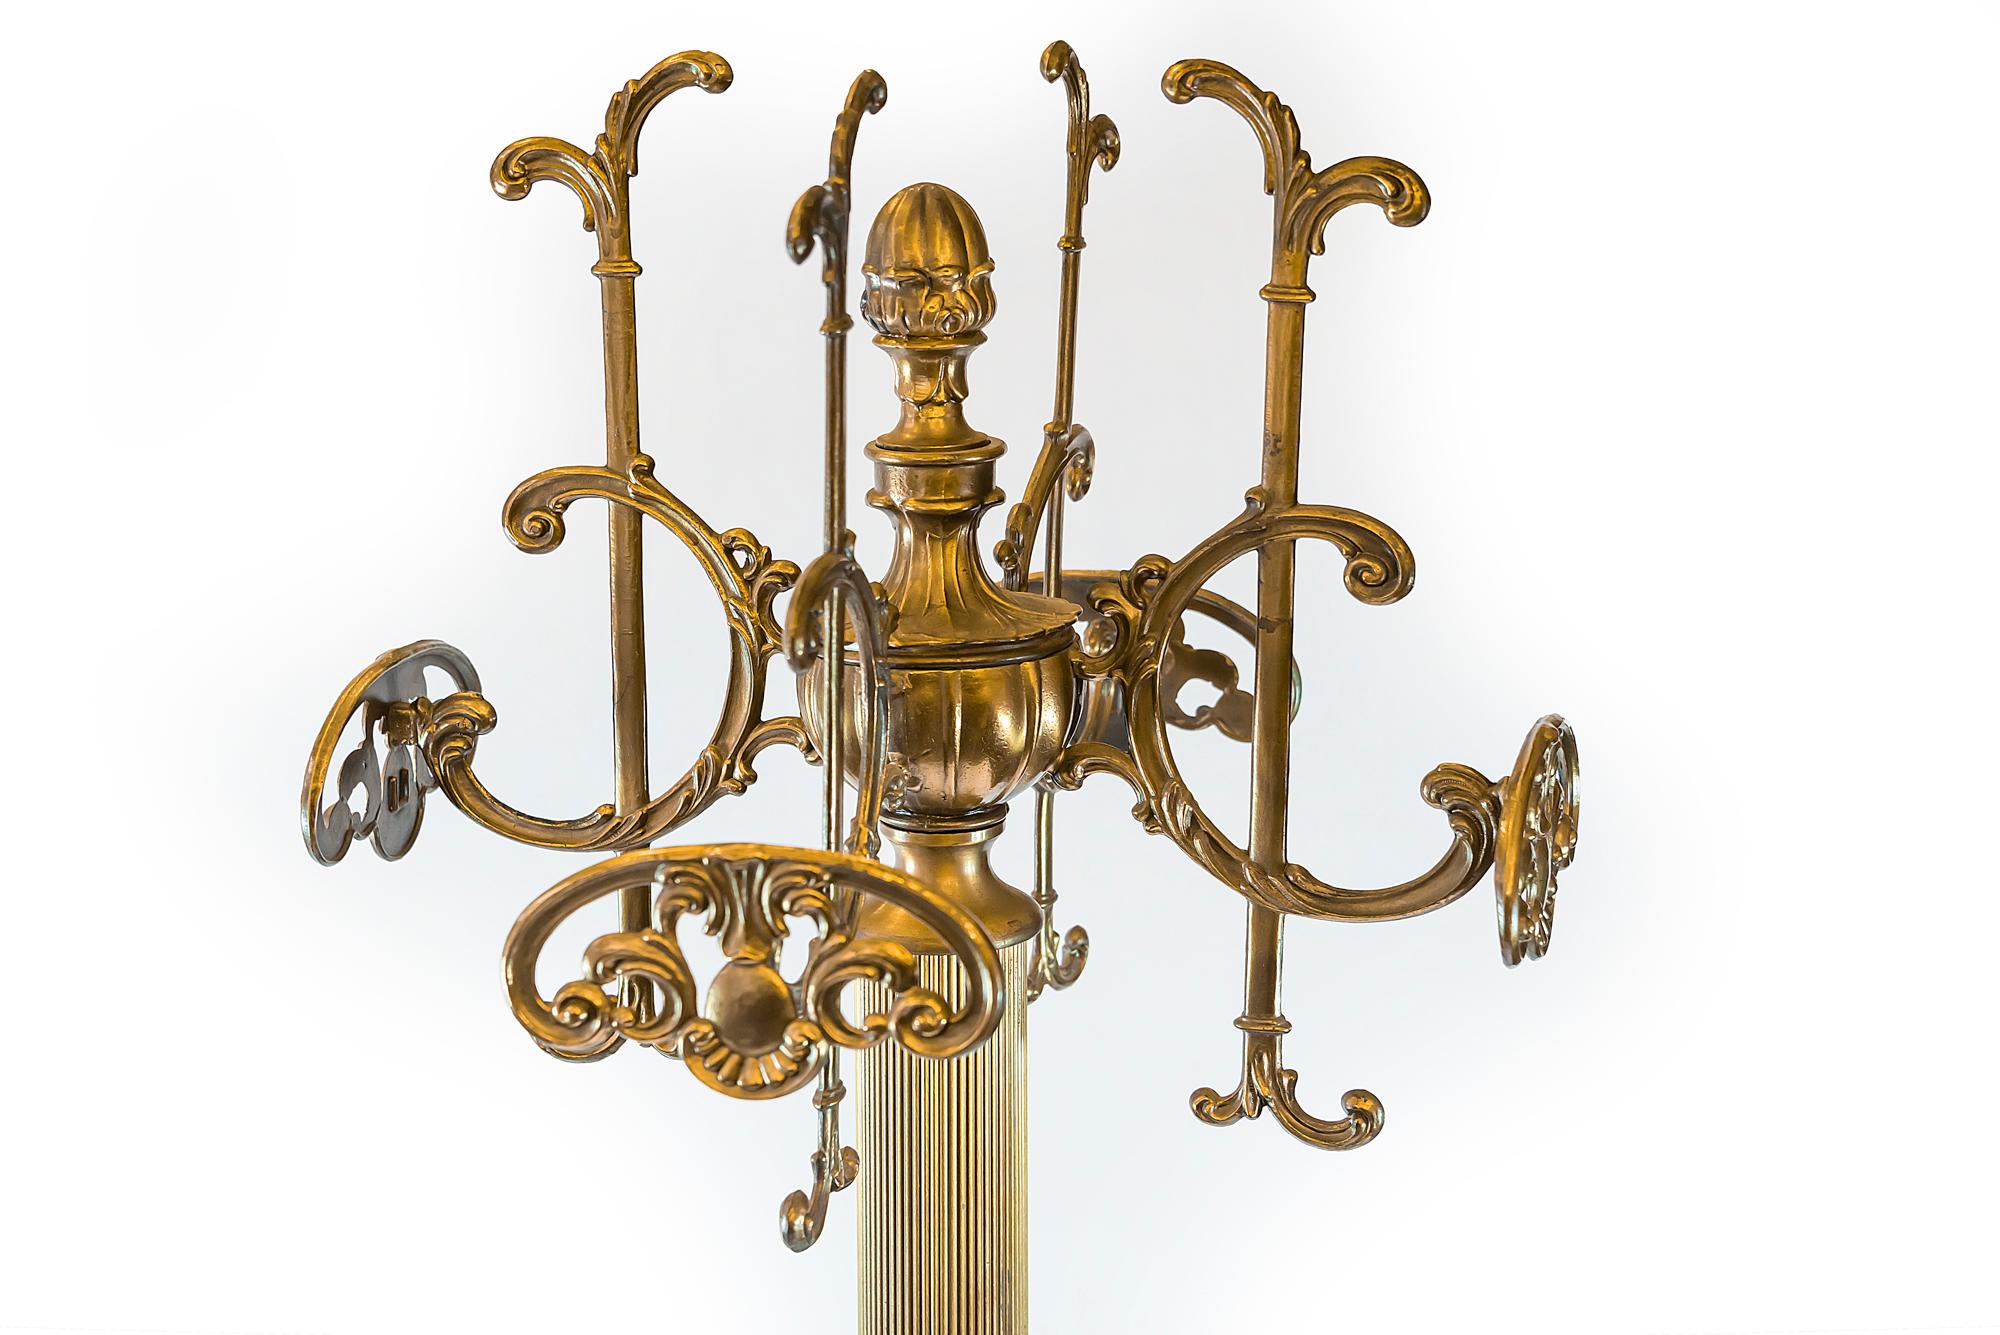 Vintage Italian brass coat rack or stand is heavy and massive with classic design details.